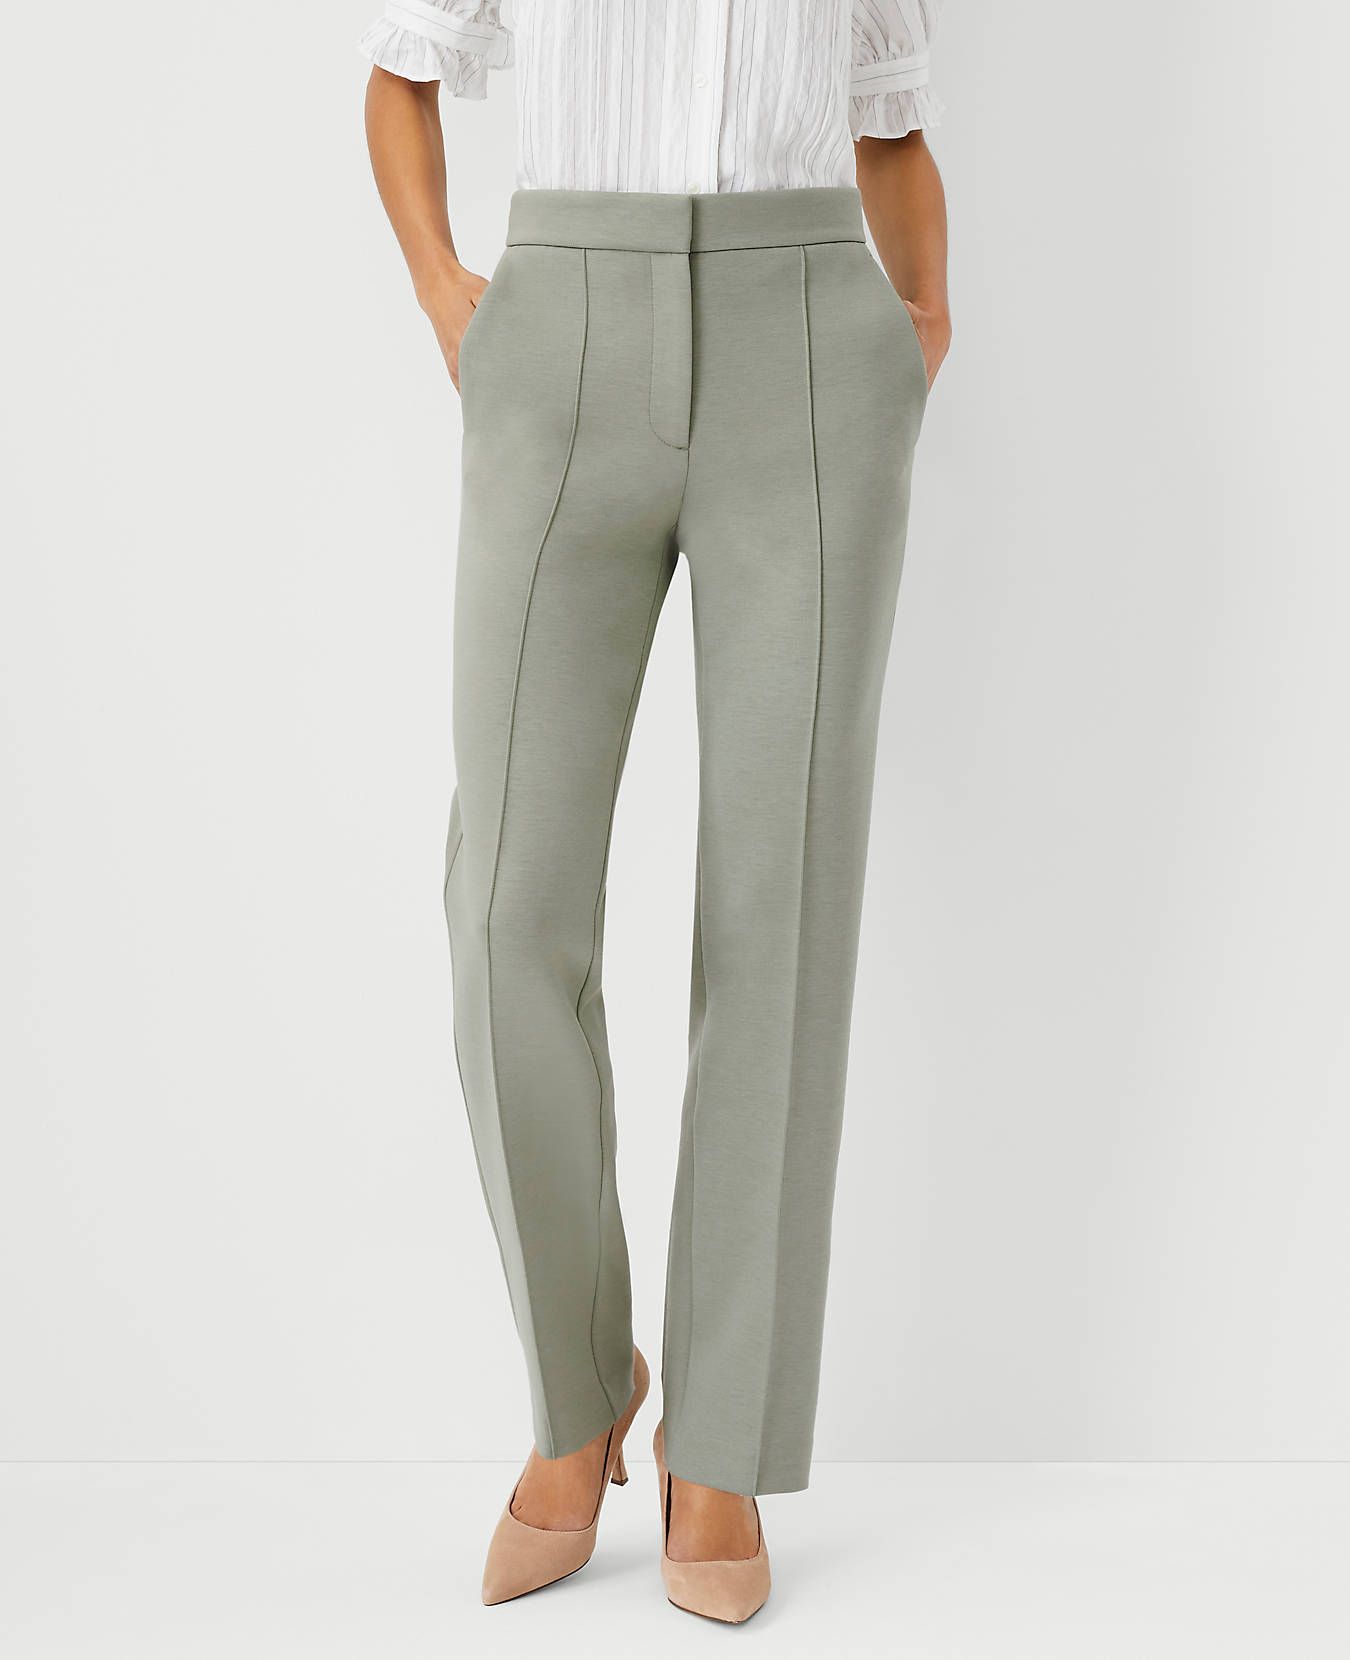 The Petite High Rise Straight Pant in Double Knit | Ann Taylor | Ann Taylor (US)